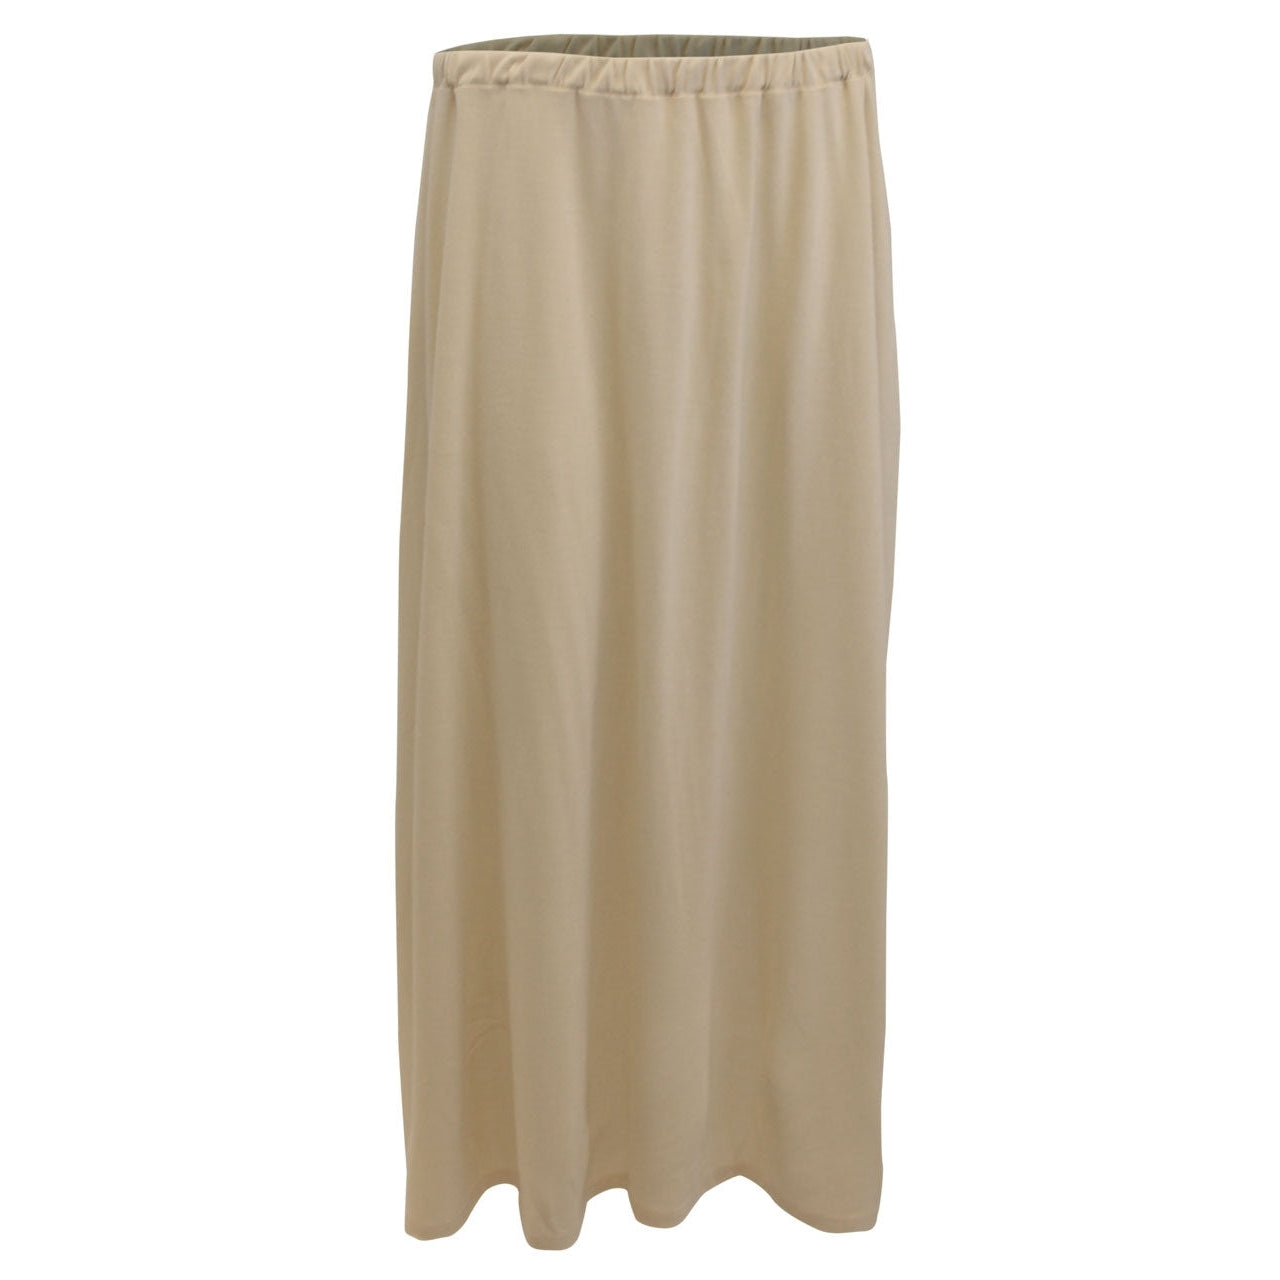 Women's Bleached Sand Skirt, by A Walk In The Park®